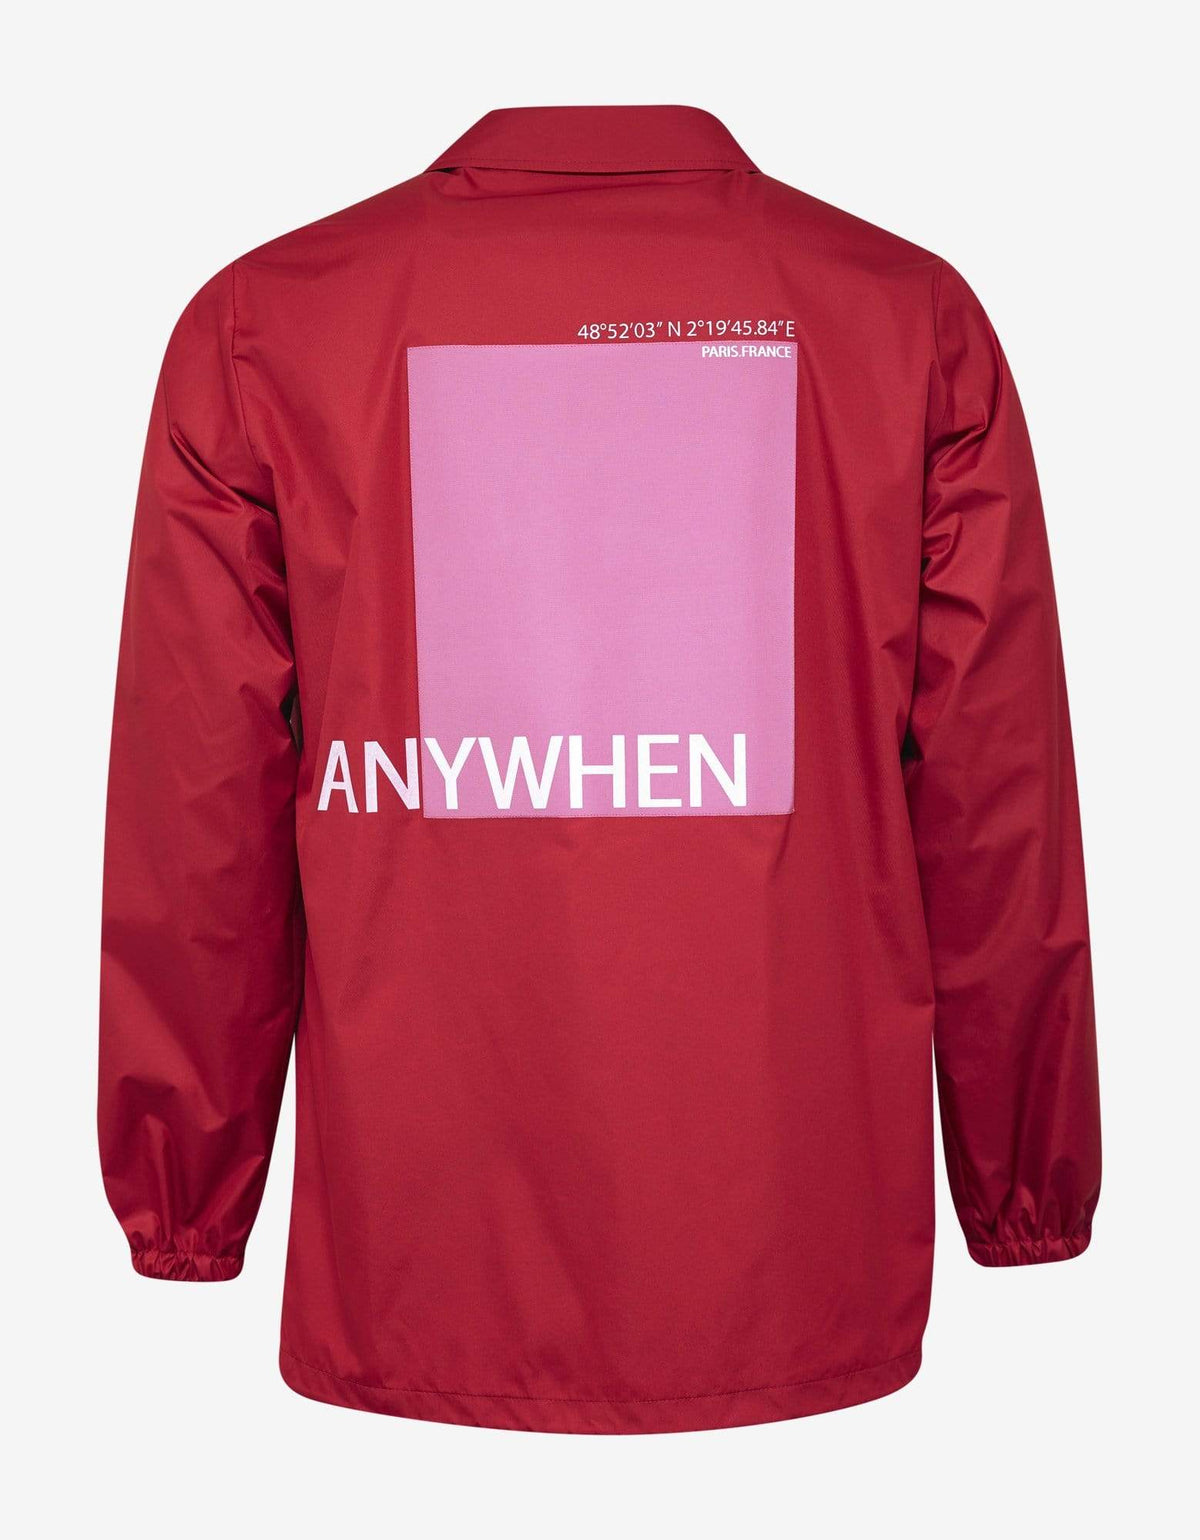 Valentino Red 'Anywhen' Print Coach Jacket